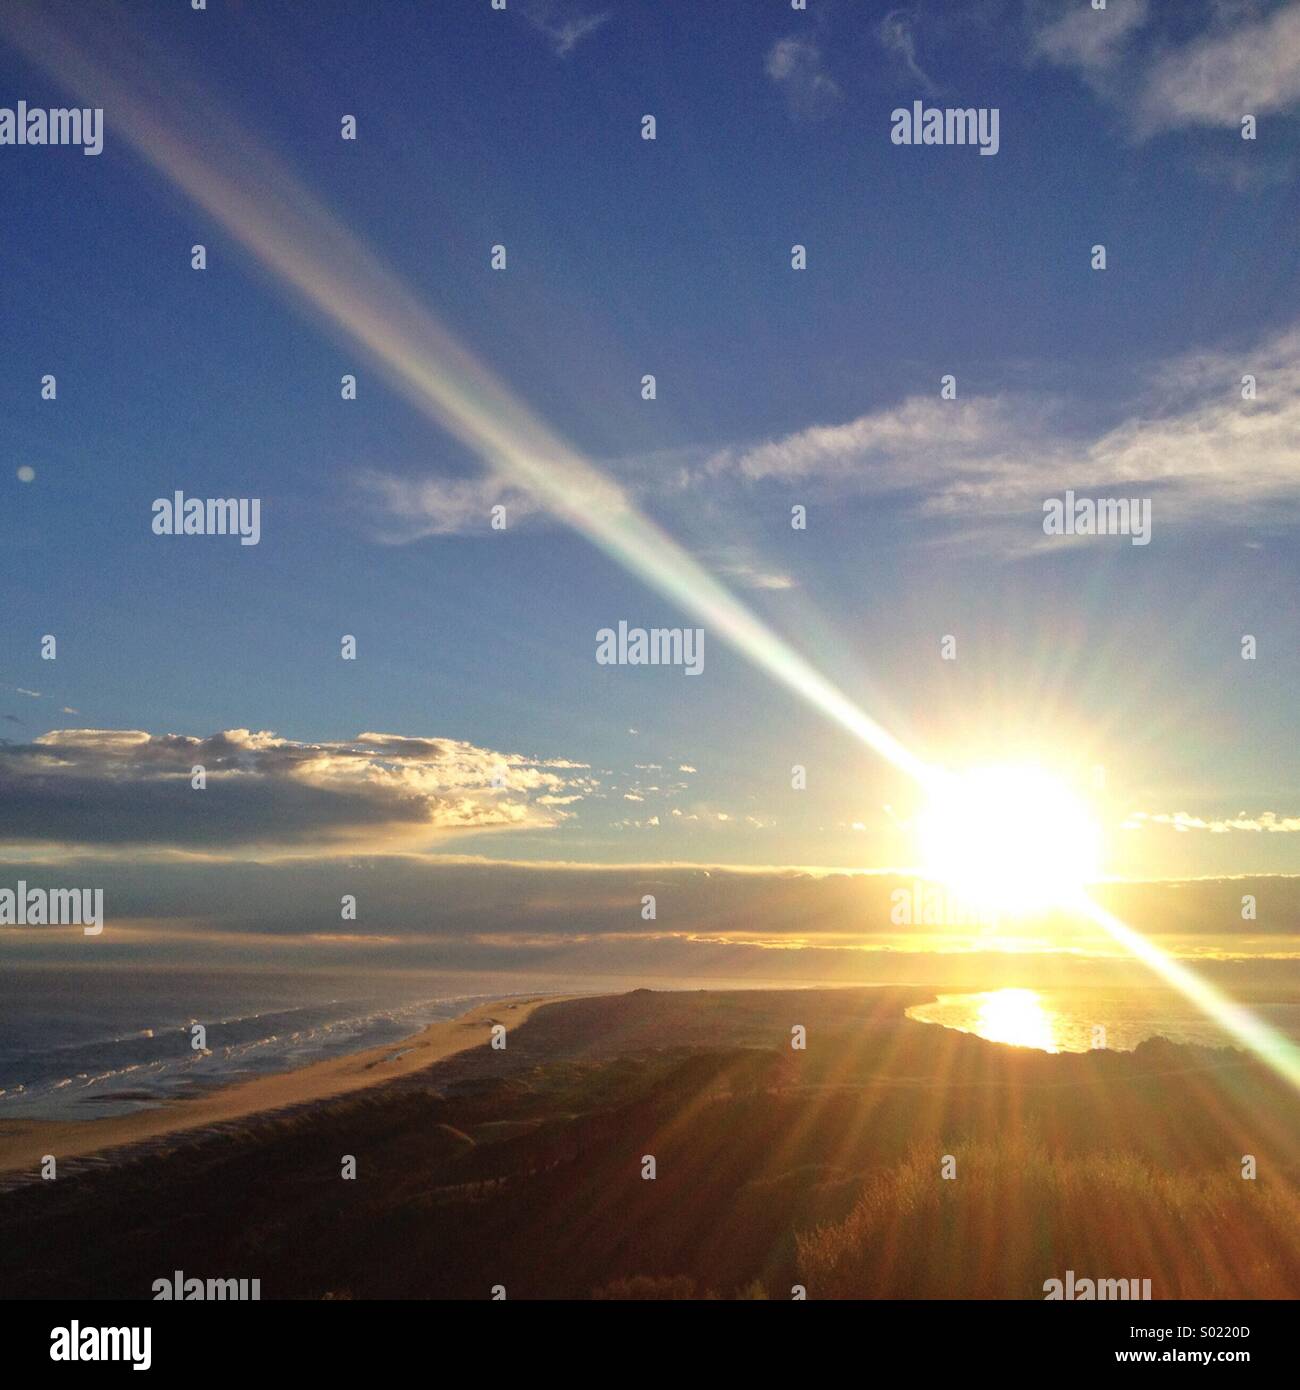 Sunrise over Farewell Spit. Northern tip of the South Island, New Zealand. Stock Photo